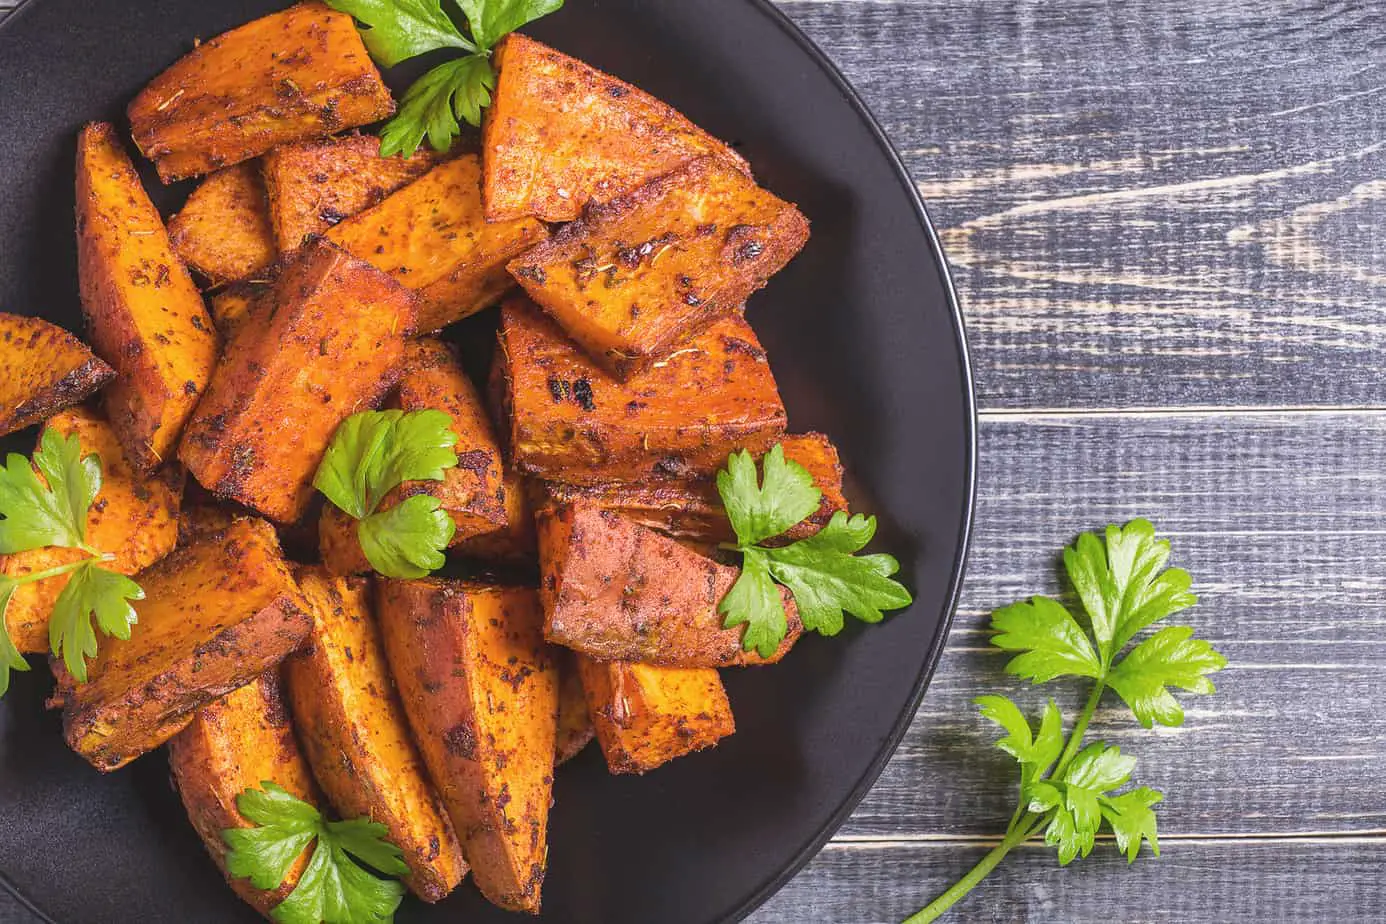 Homemade Cooked Sweet Potato With Spices And Herbs.